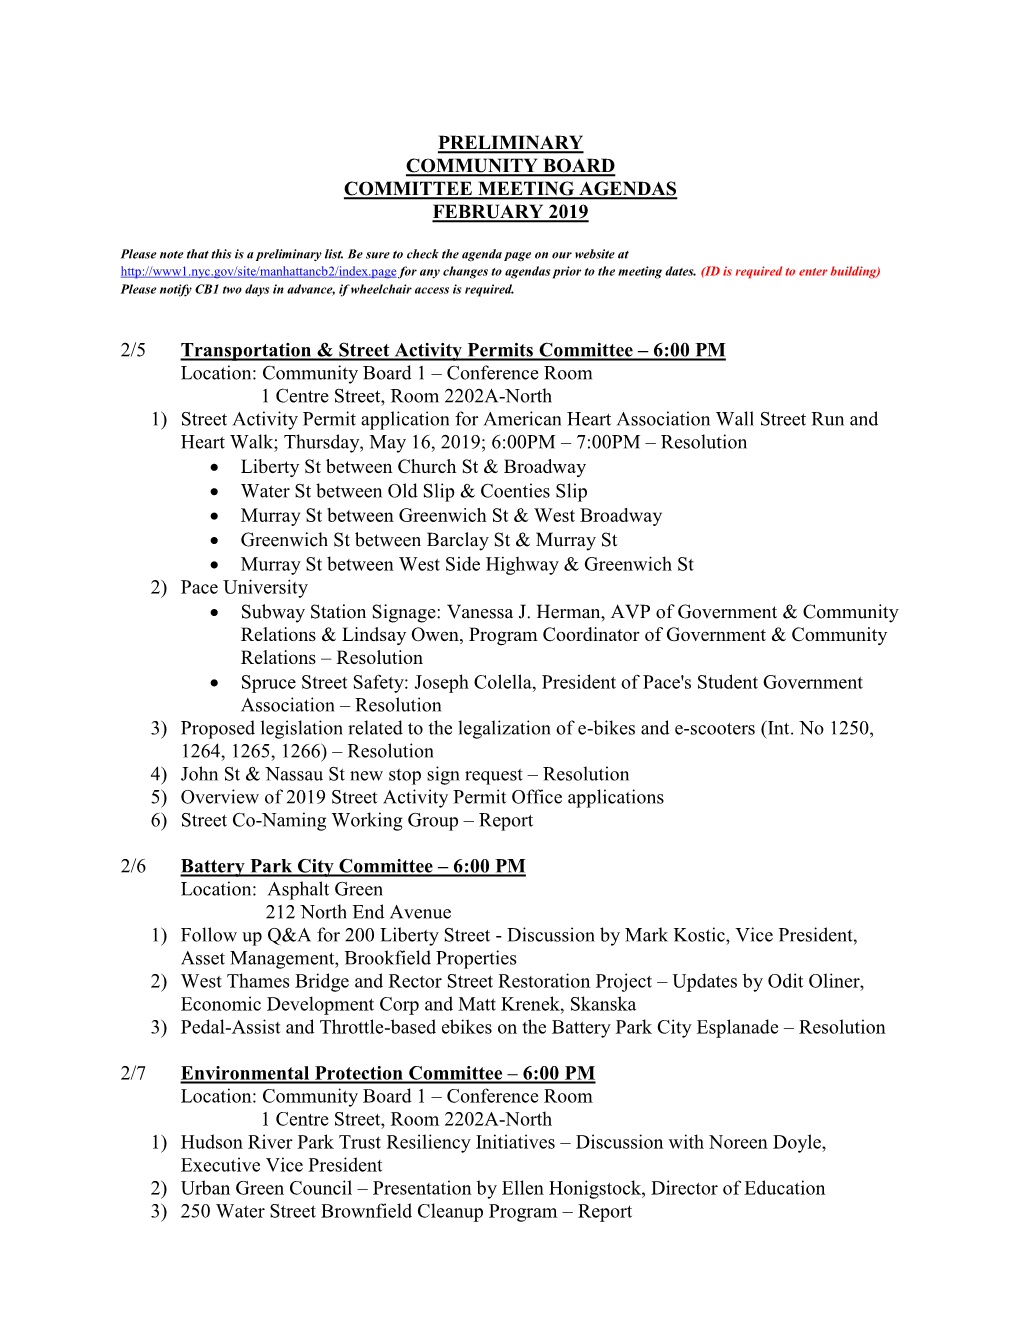 Preliminary Community Board Committee Meeting Agendas February 2019